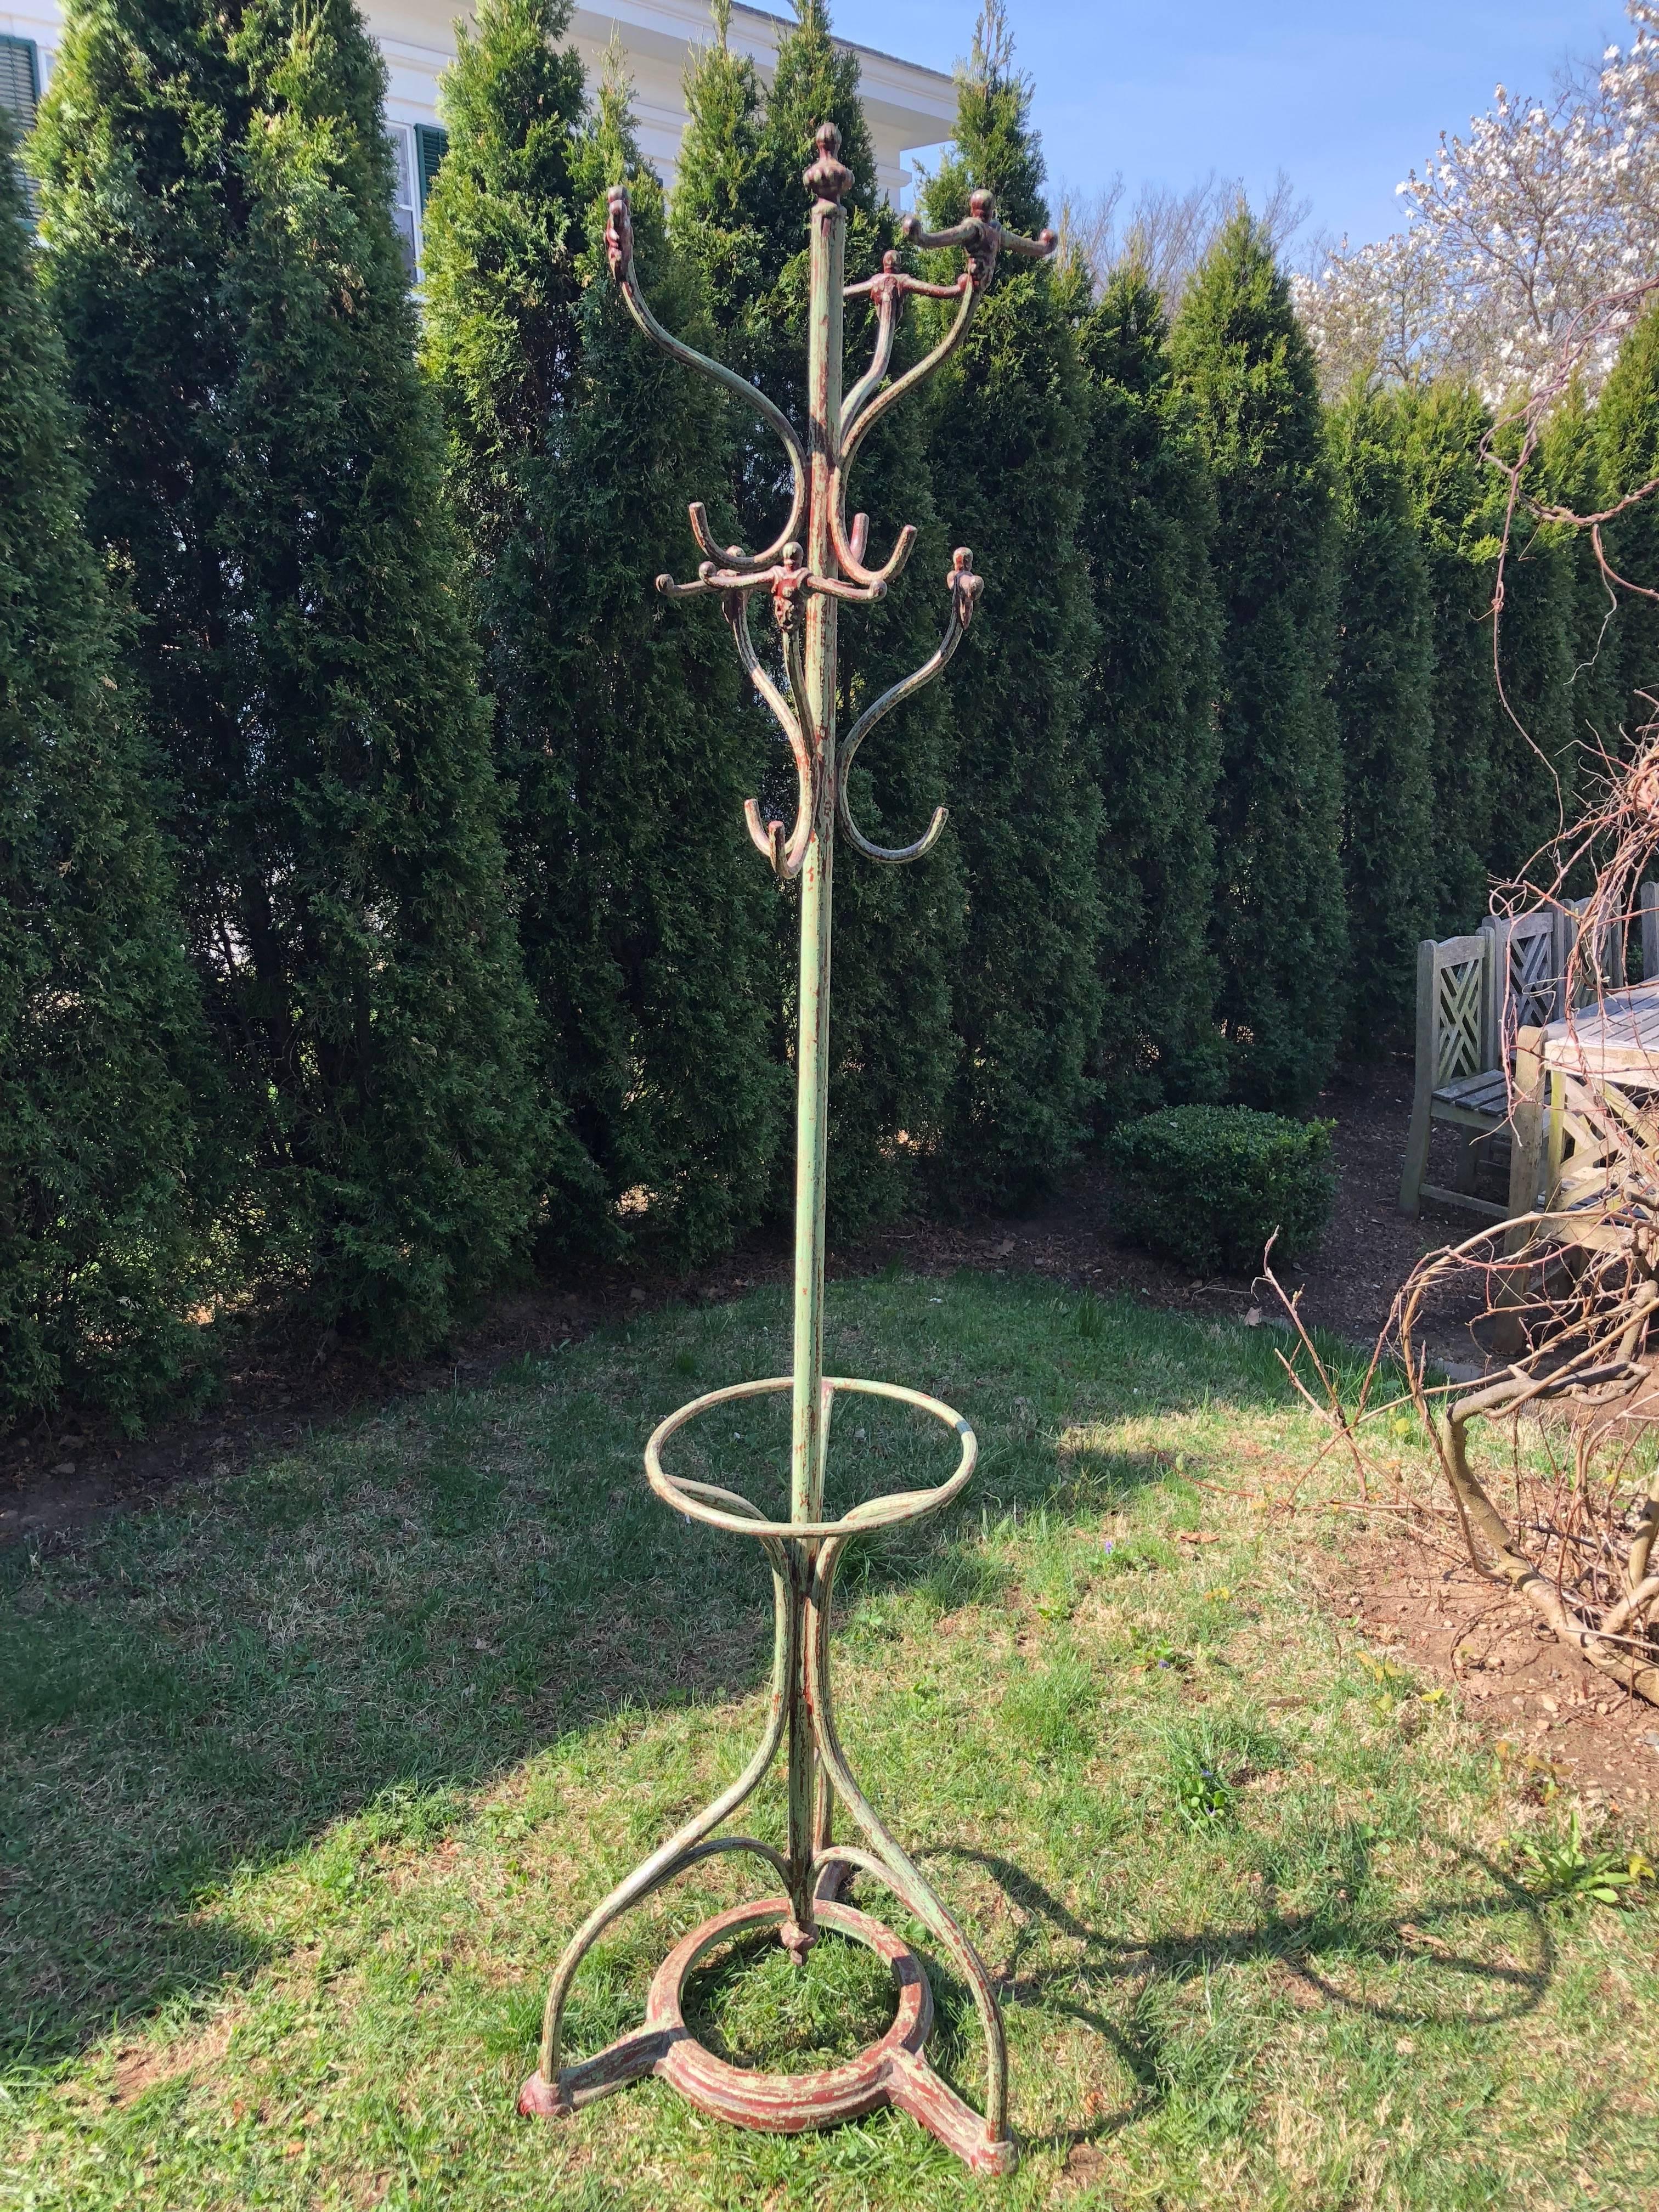 Beautiful coat racks are difficult to find these days and are so utilitarian for any front hallway or corner of an apartment. This gorgeous one also could be used as a unique trellis in the garden, covered in clematis or climbing roses. Made of